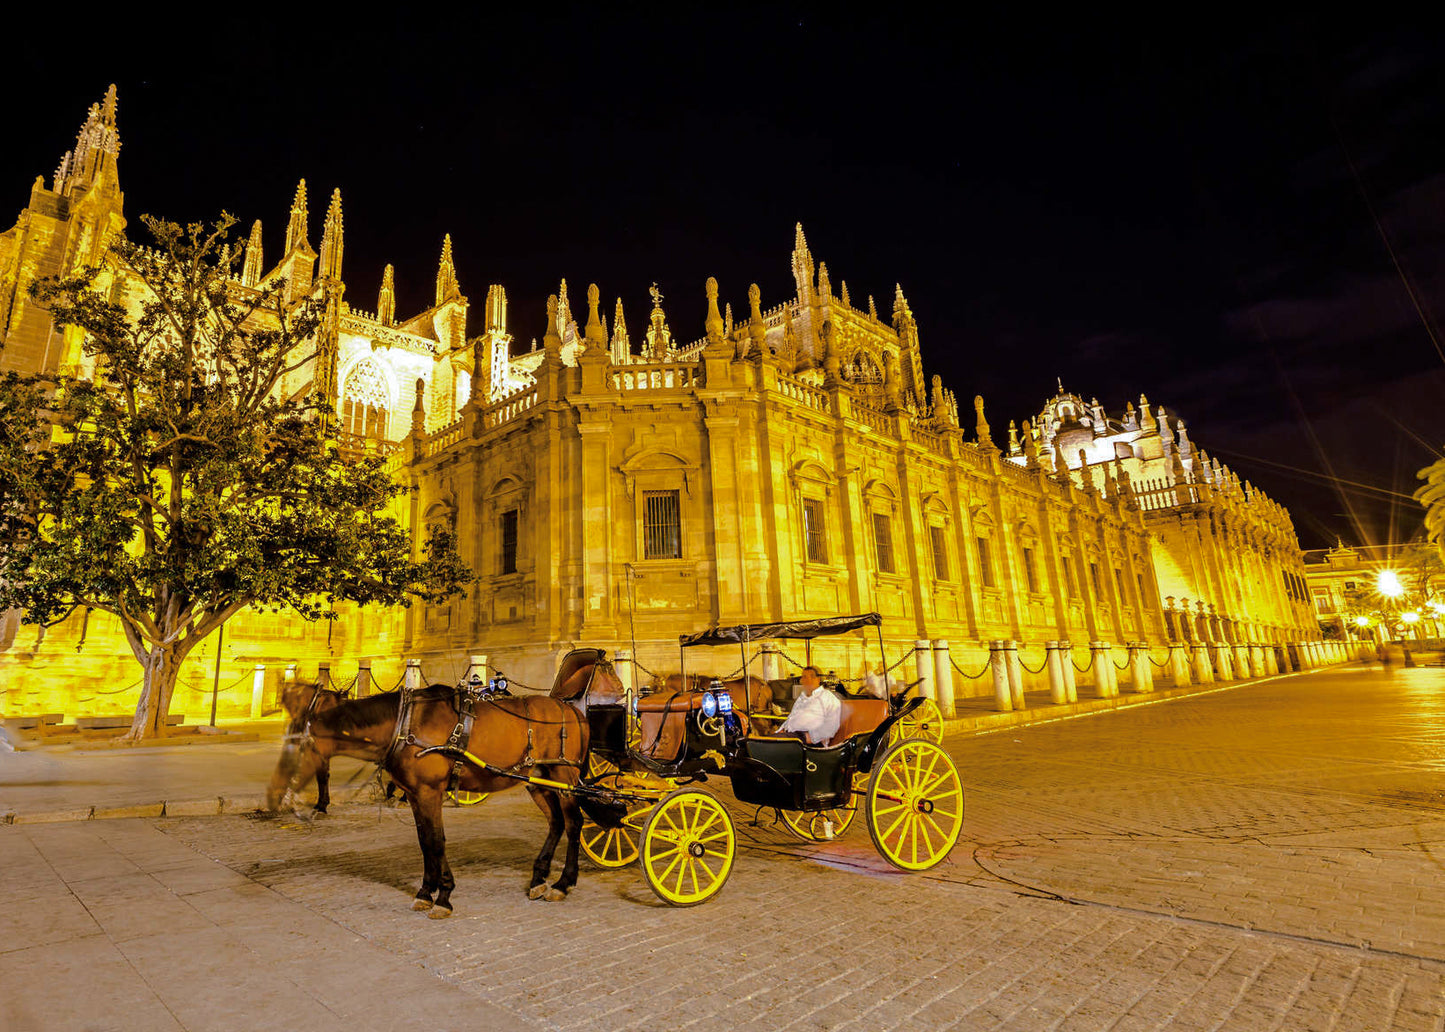 Horse Carriage Ride for Four People - 120,00€